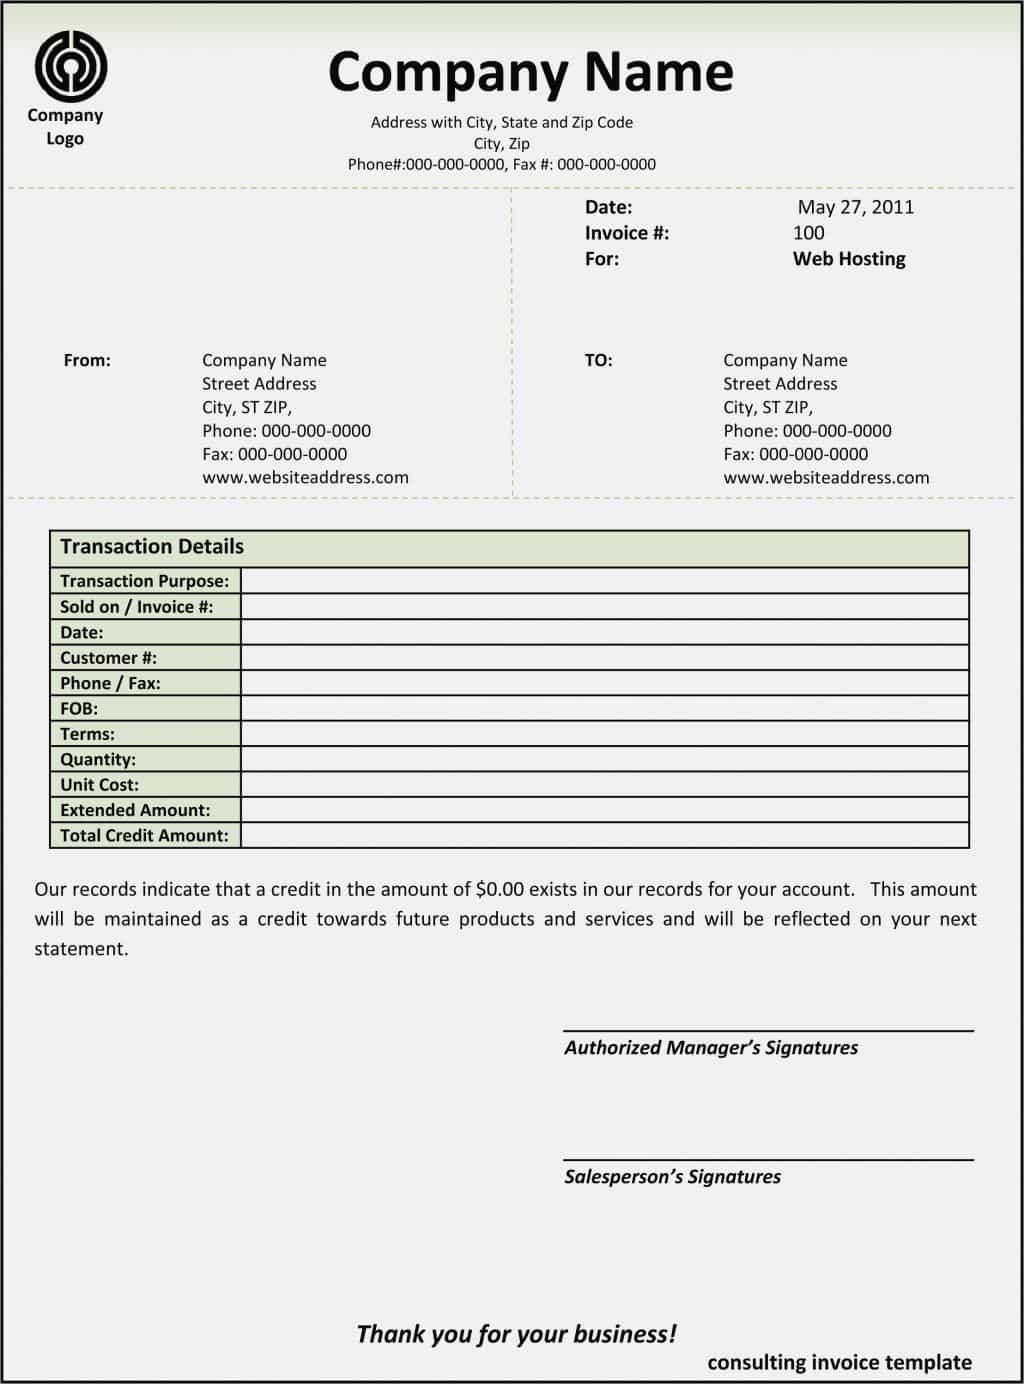 Invoice template pdf and flooring invoice template